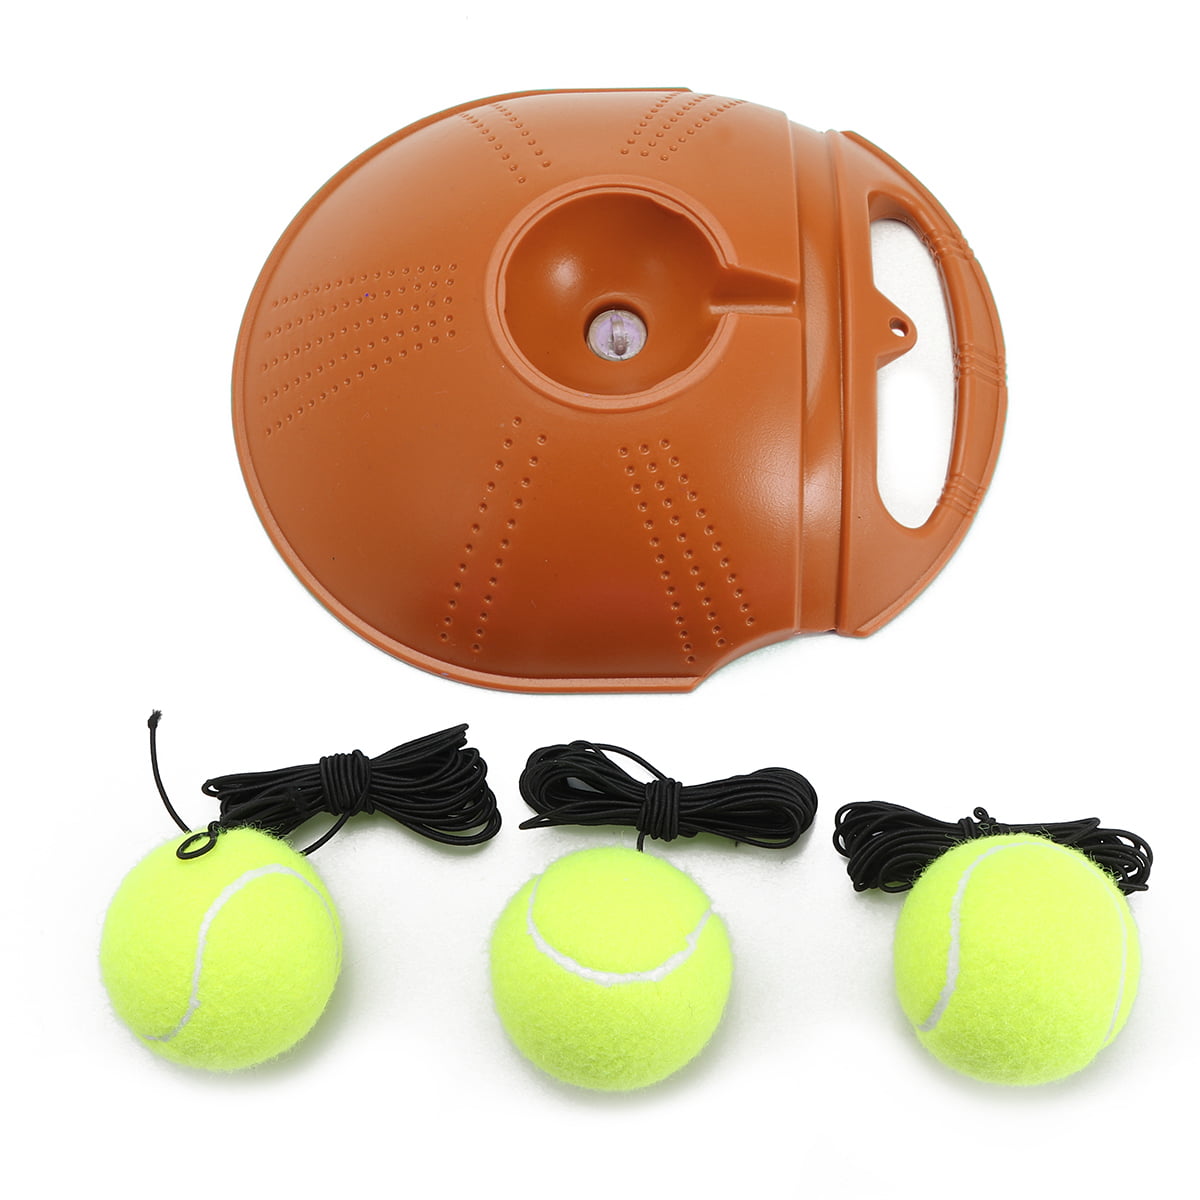 1X Trainer Tennis Practice Balls with String Replacement Training Tool Tennis Training Ball Self-Study Practice Exercise Tennis Ball Rebound Ball with String for Tennis Trainer 